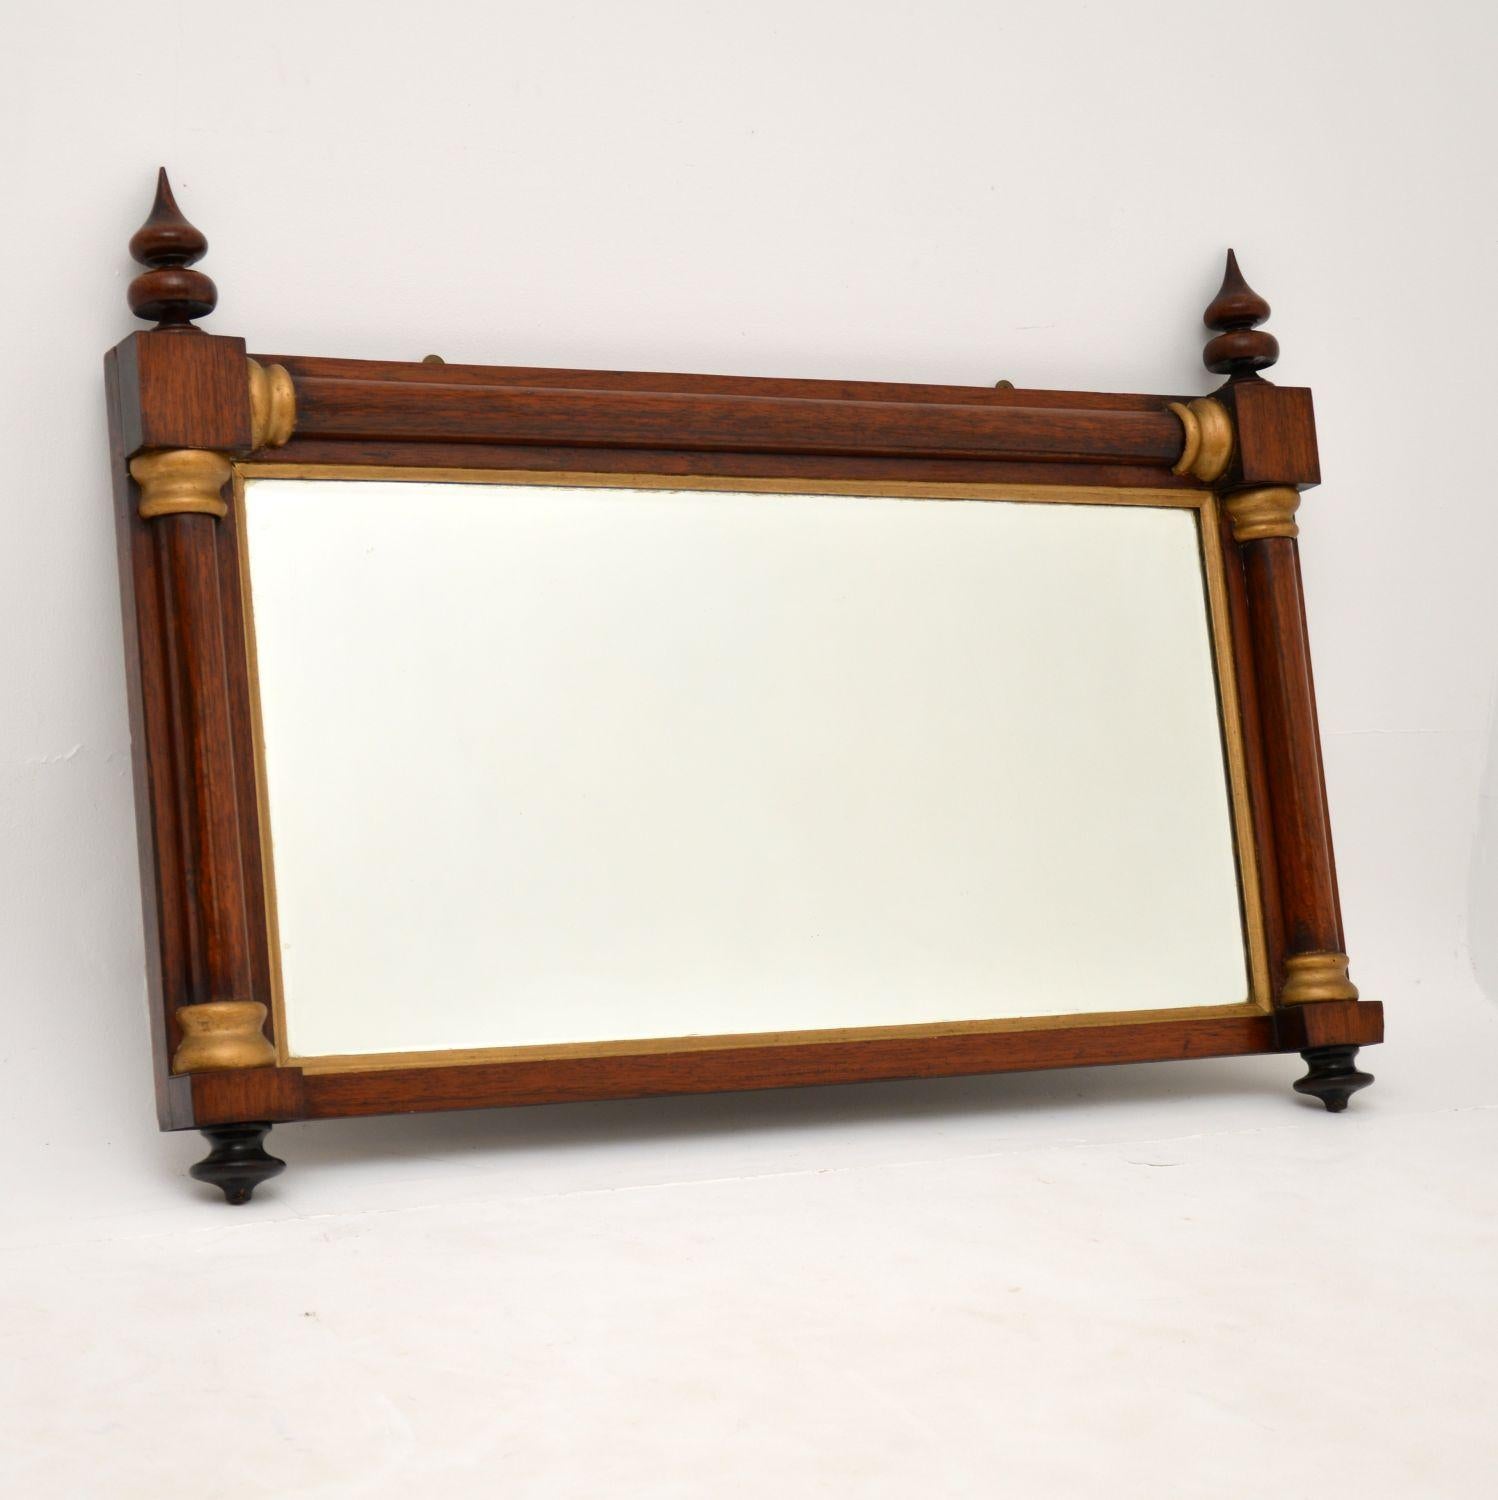 A gorgeous antique William IV period over mantle mirror, dating from around the 1830-40 period.

The quality is amazing, with a stunning solid wood frame embellished with a gilt inner border and gilt corners. It still has all the original finials,